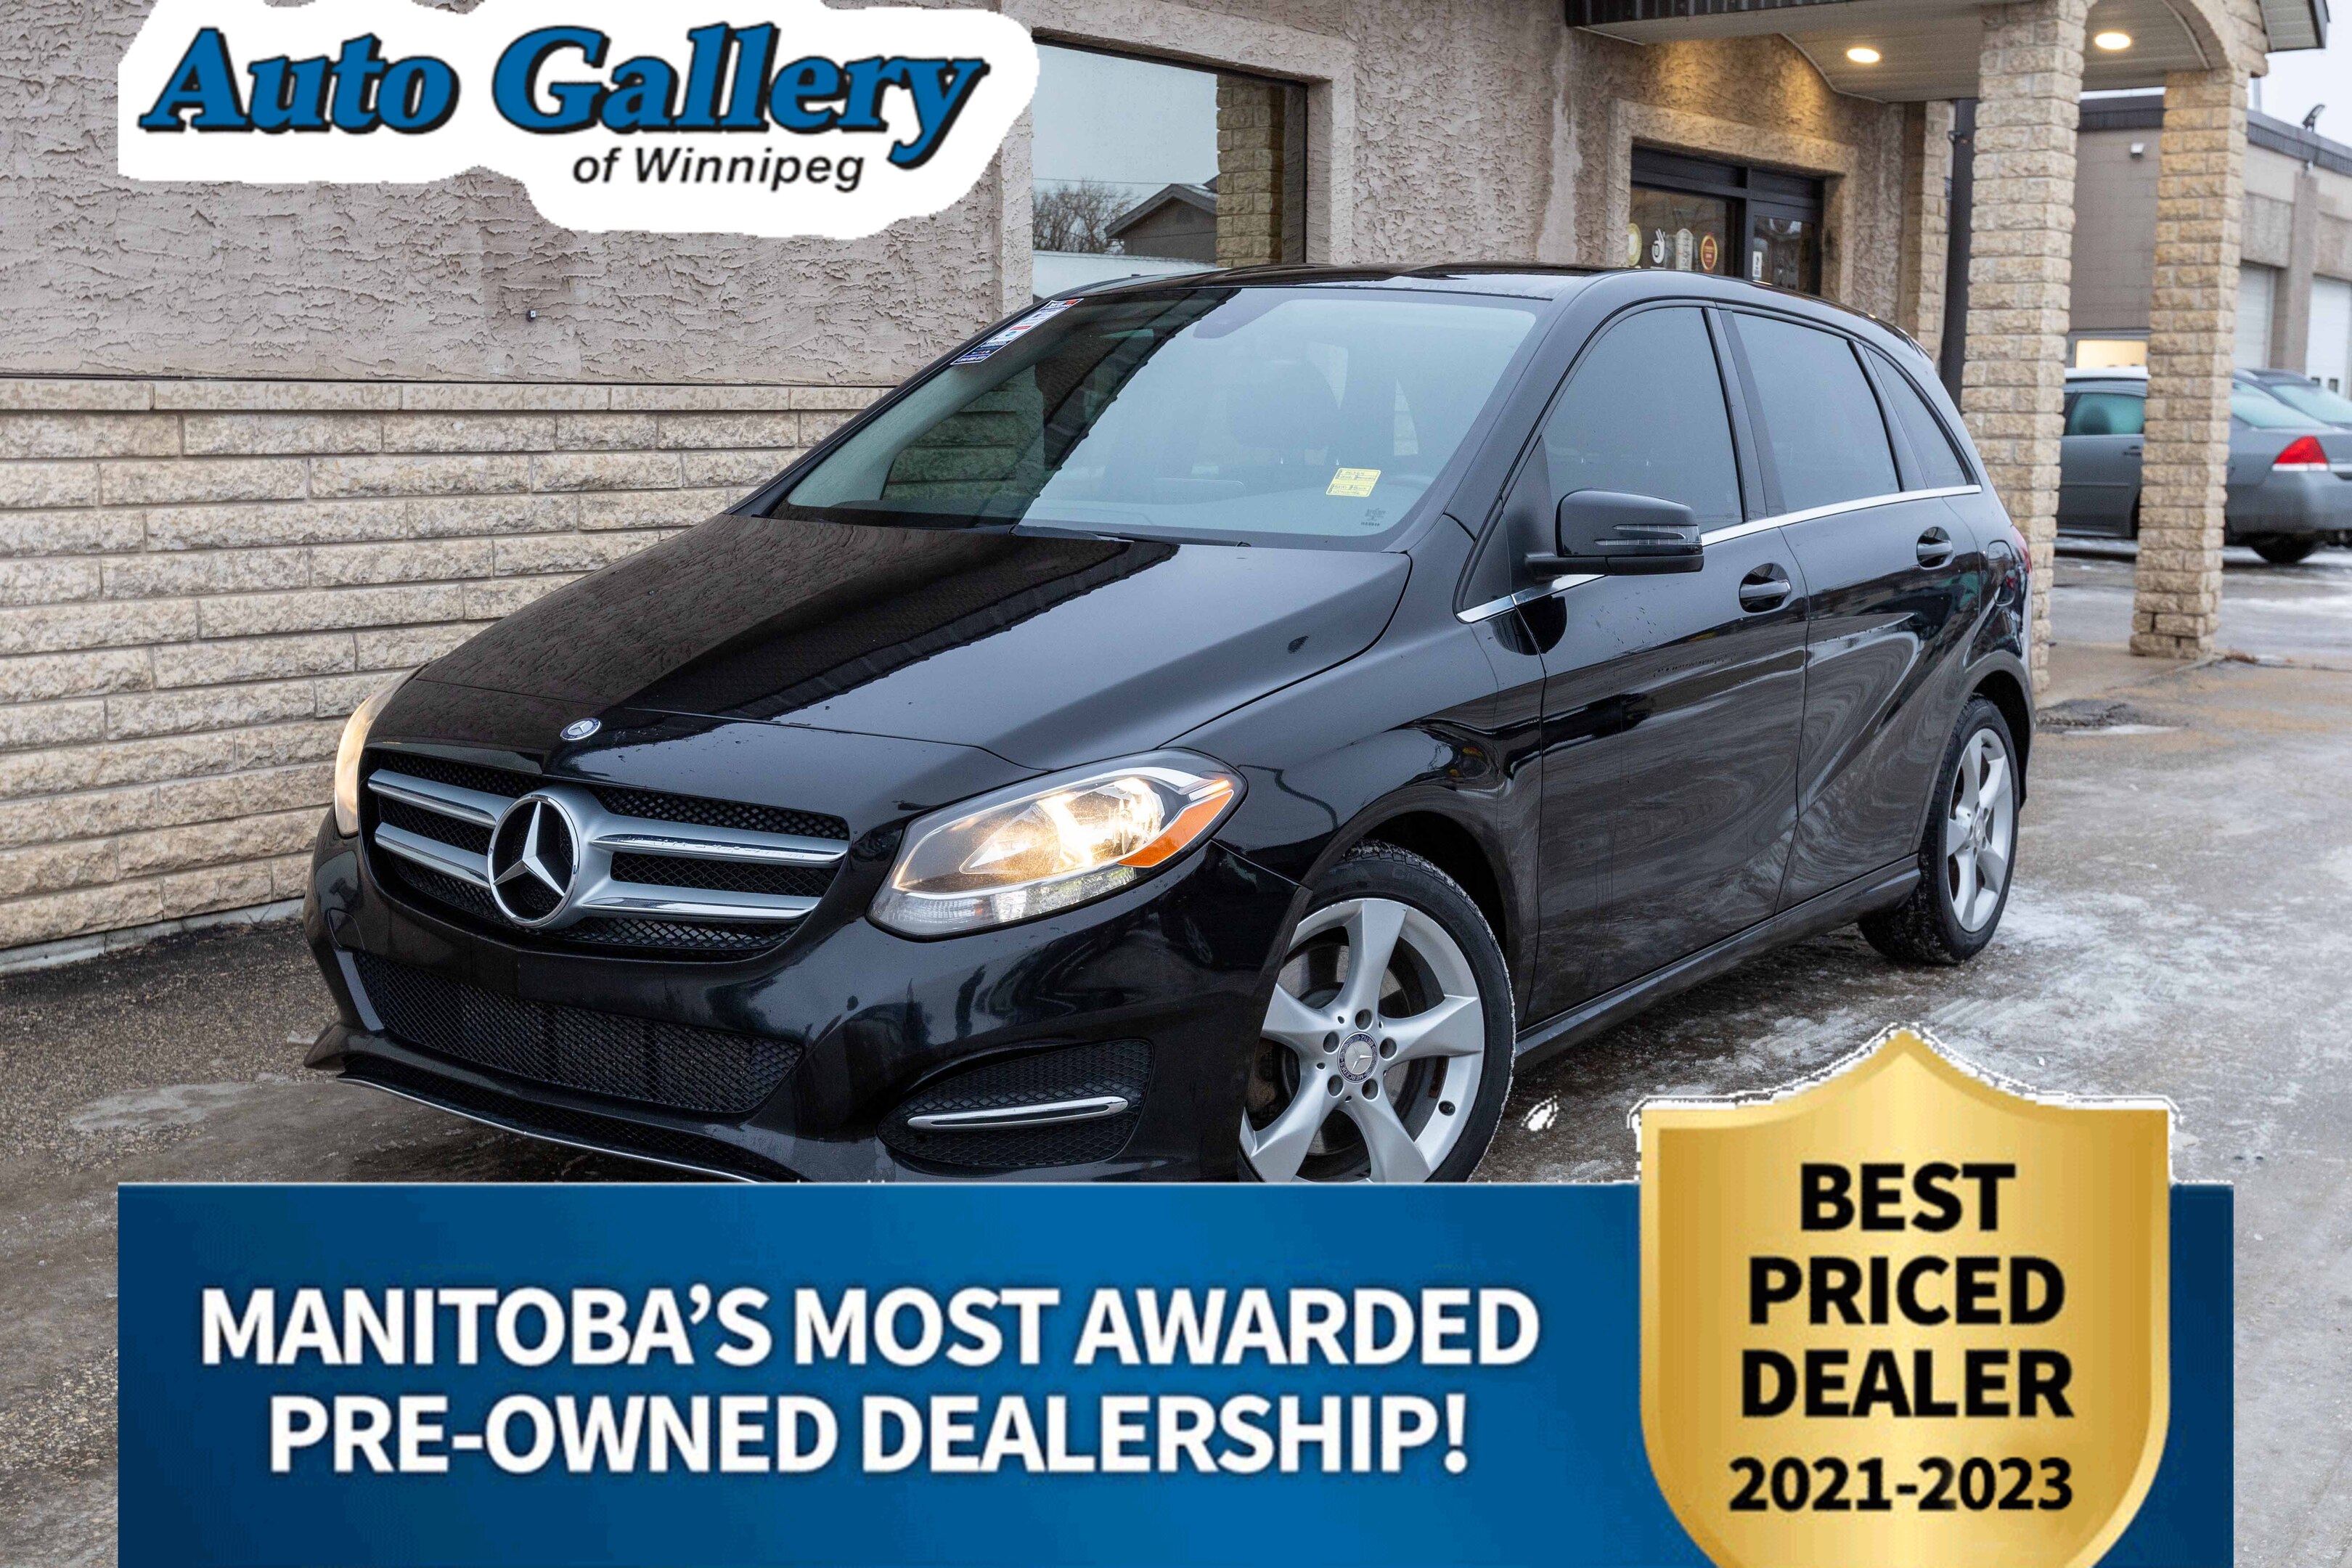 2016 Mercedes-Benz B-Class AWD, HEATED SEATS, BLUETOOTH, AUTO CLIMATE & MORE!